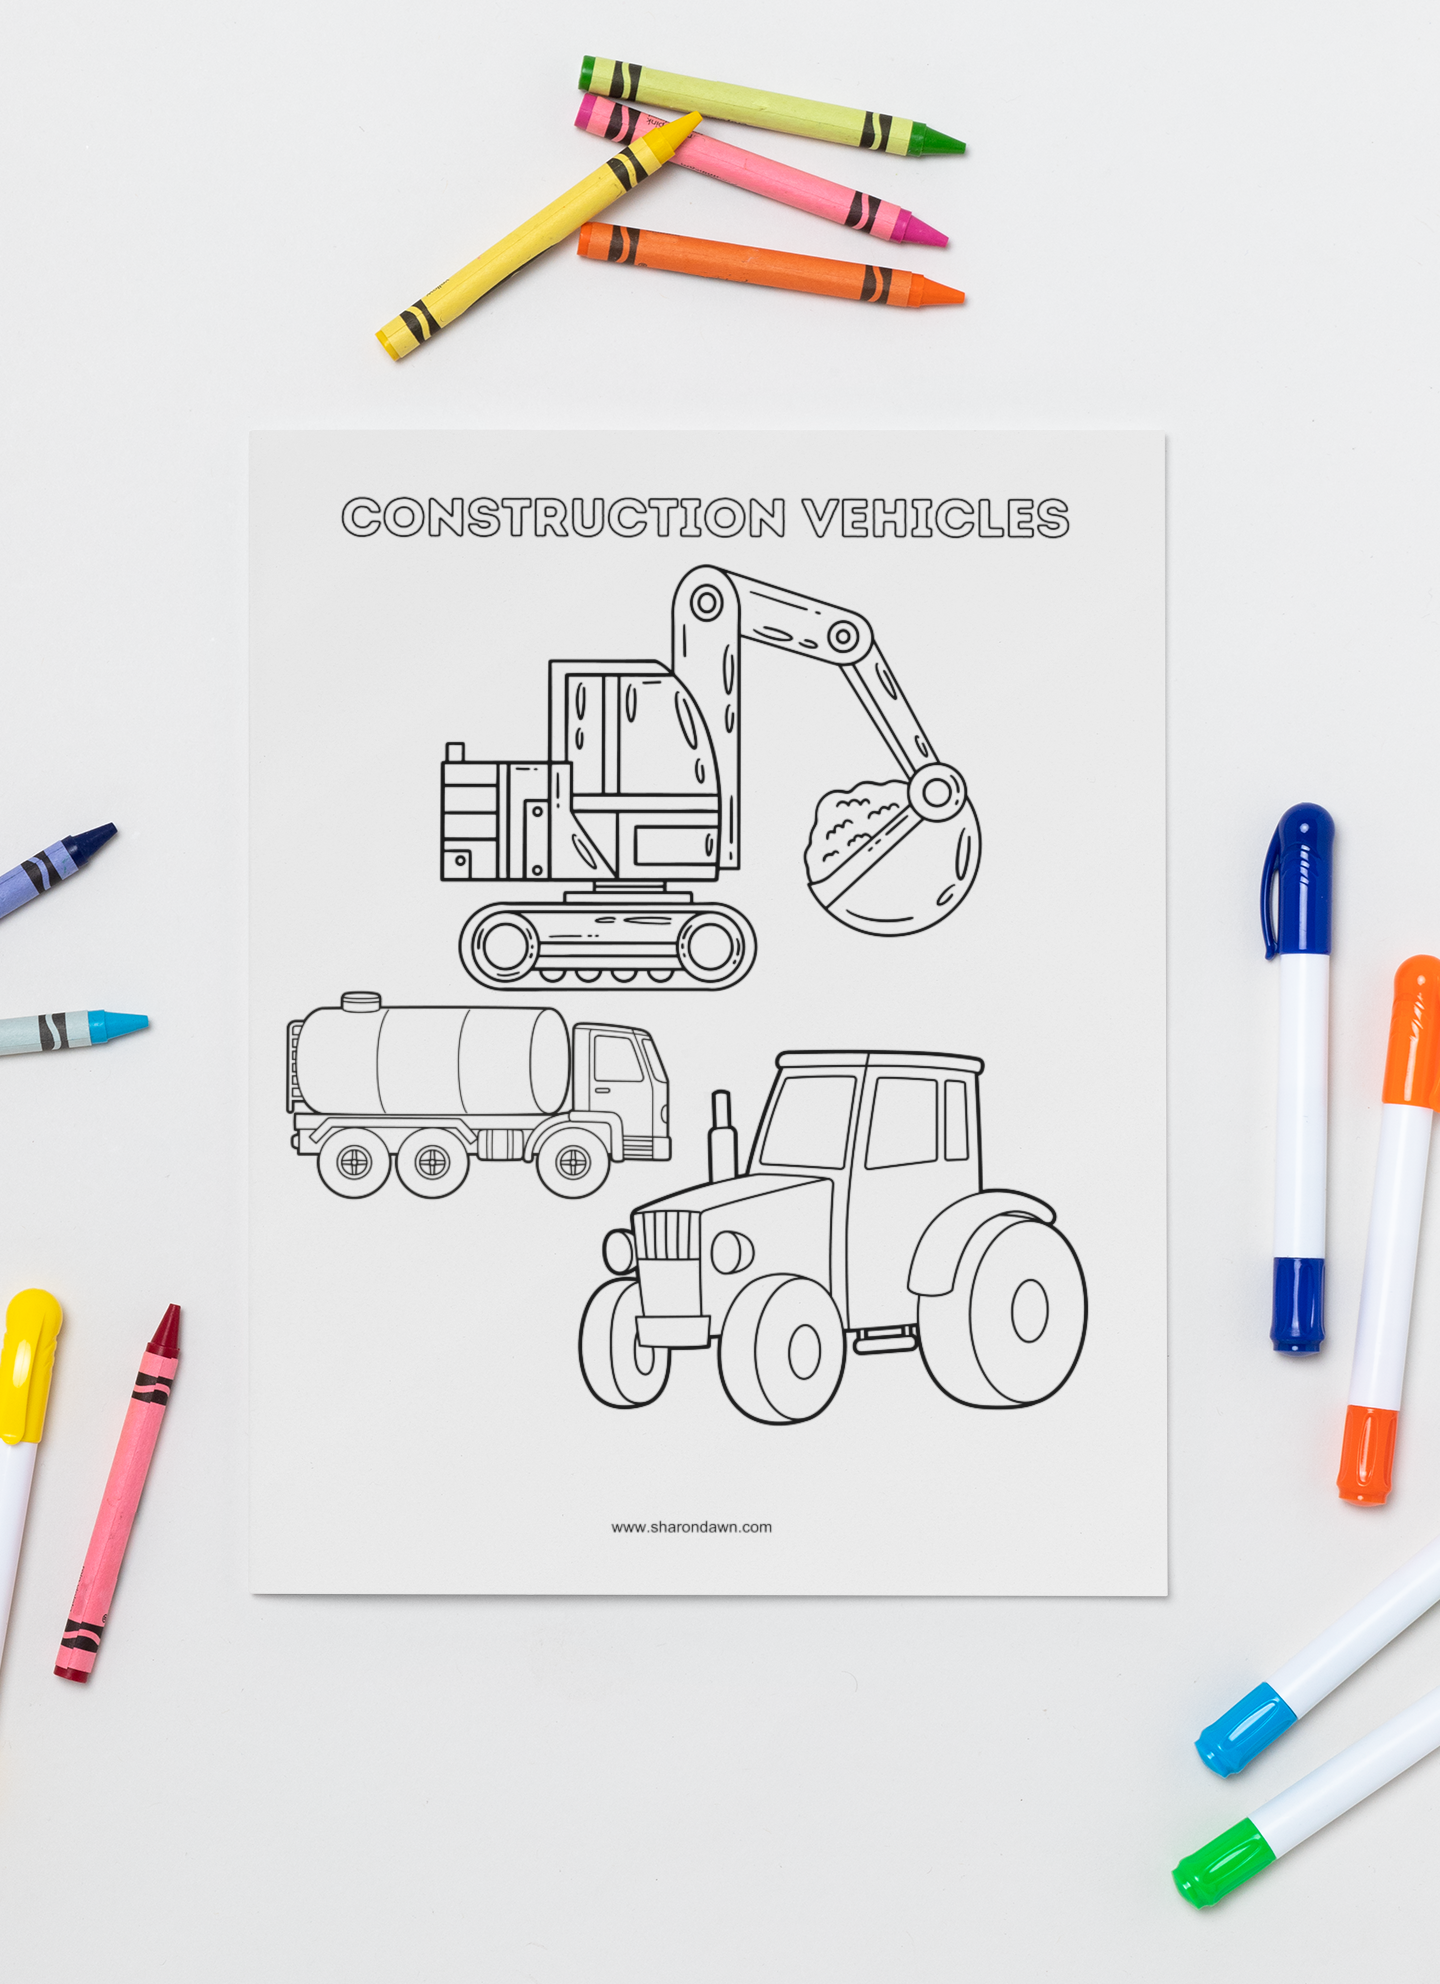 Construction Vehicles - Colouring Page - Printable Digital Download ~ Sharon Dawn Collection